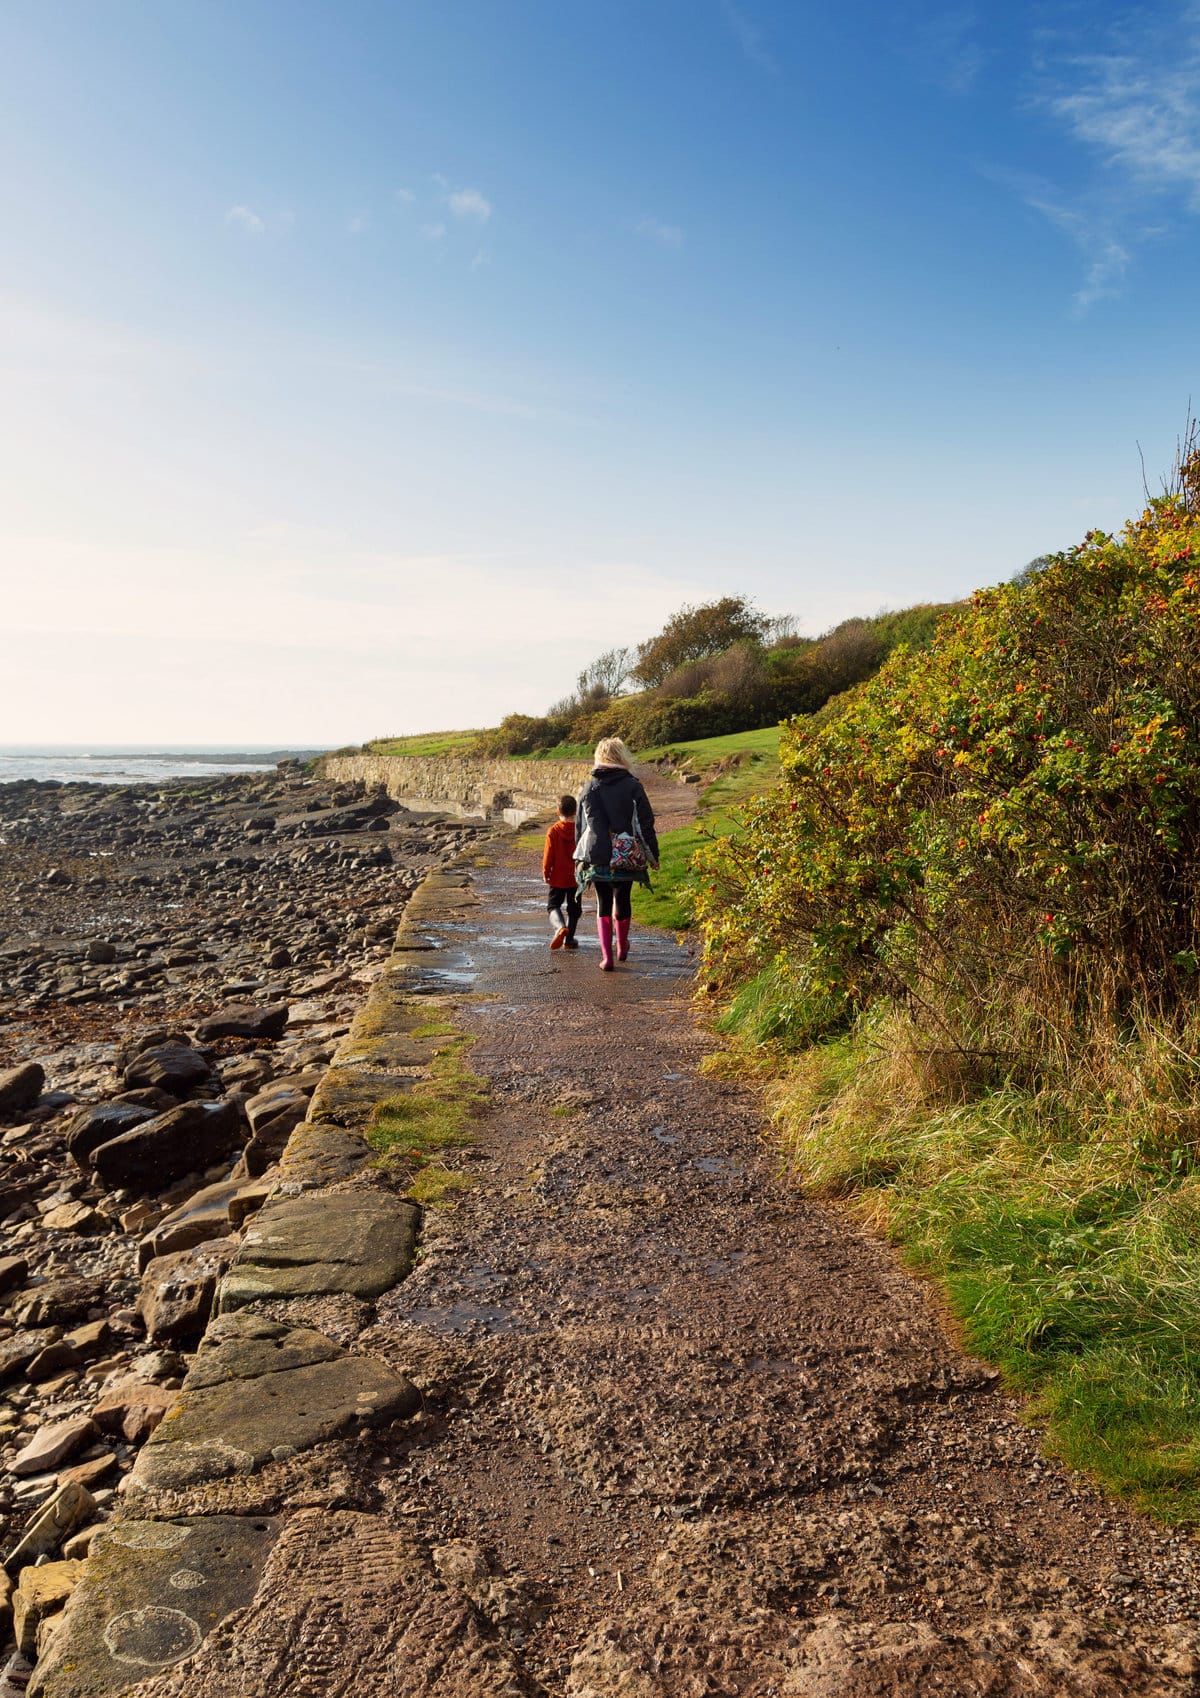 A mother and her son walking along a coastal path in Crail, Fife, Scotland